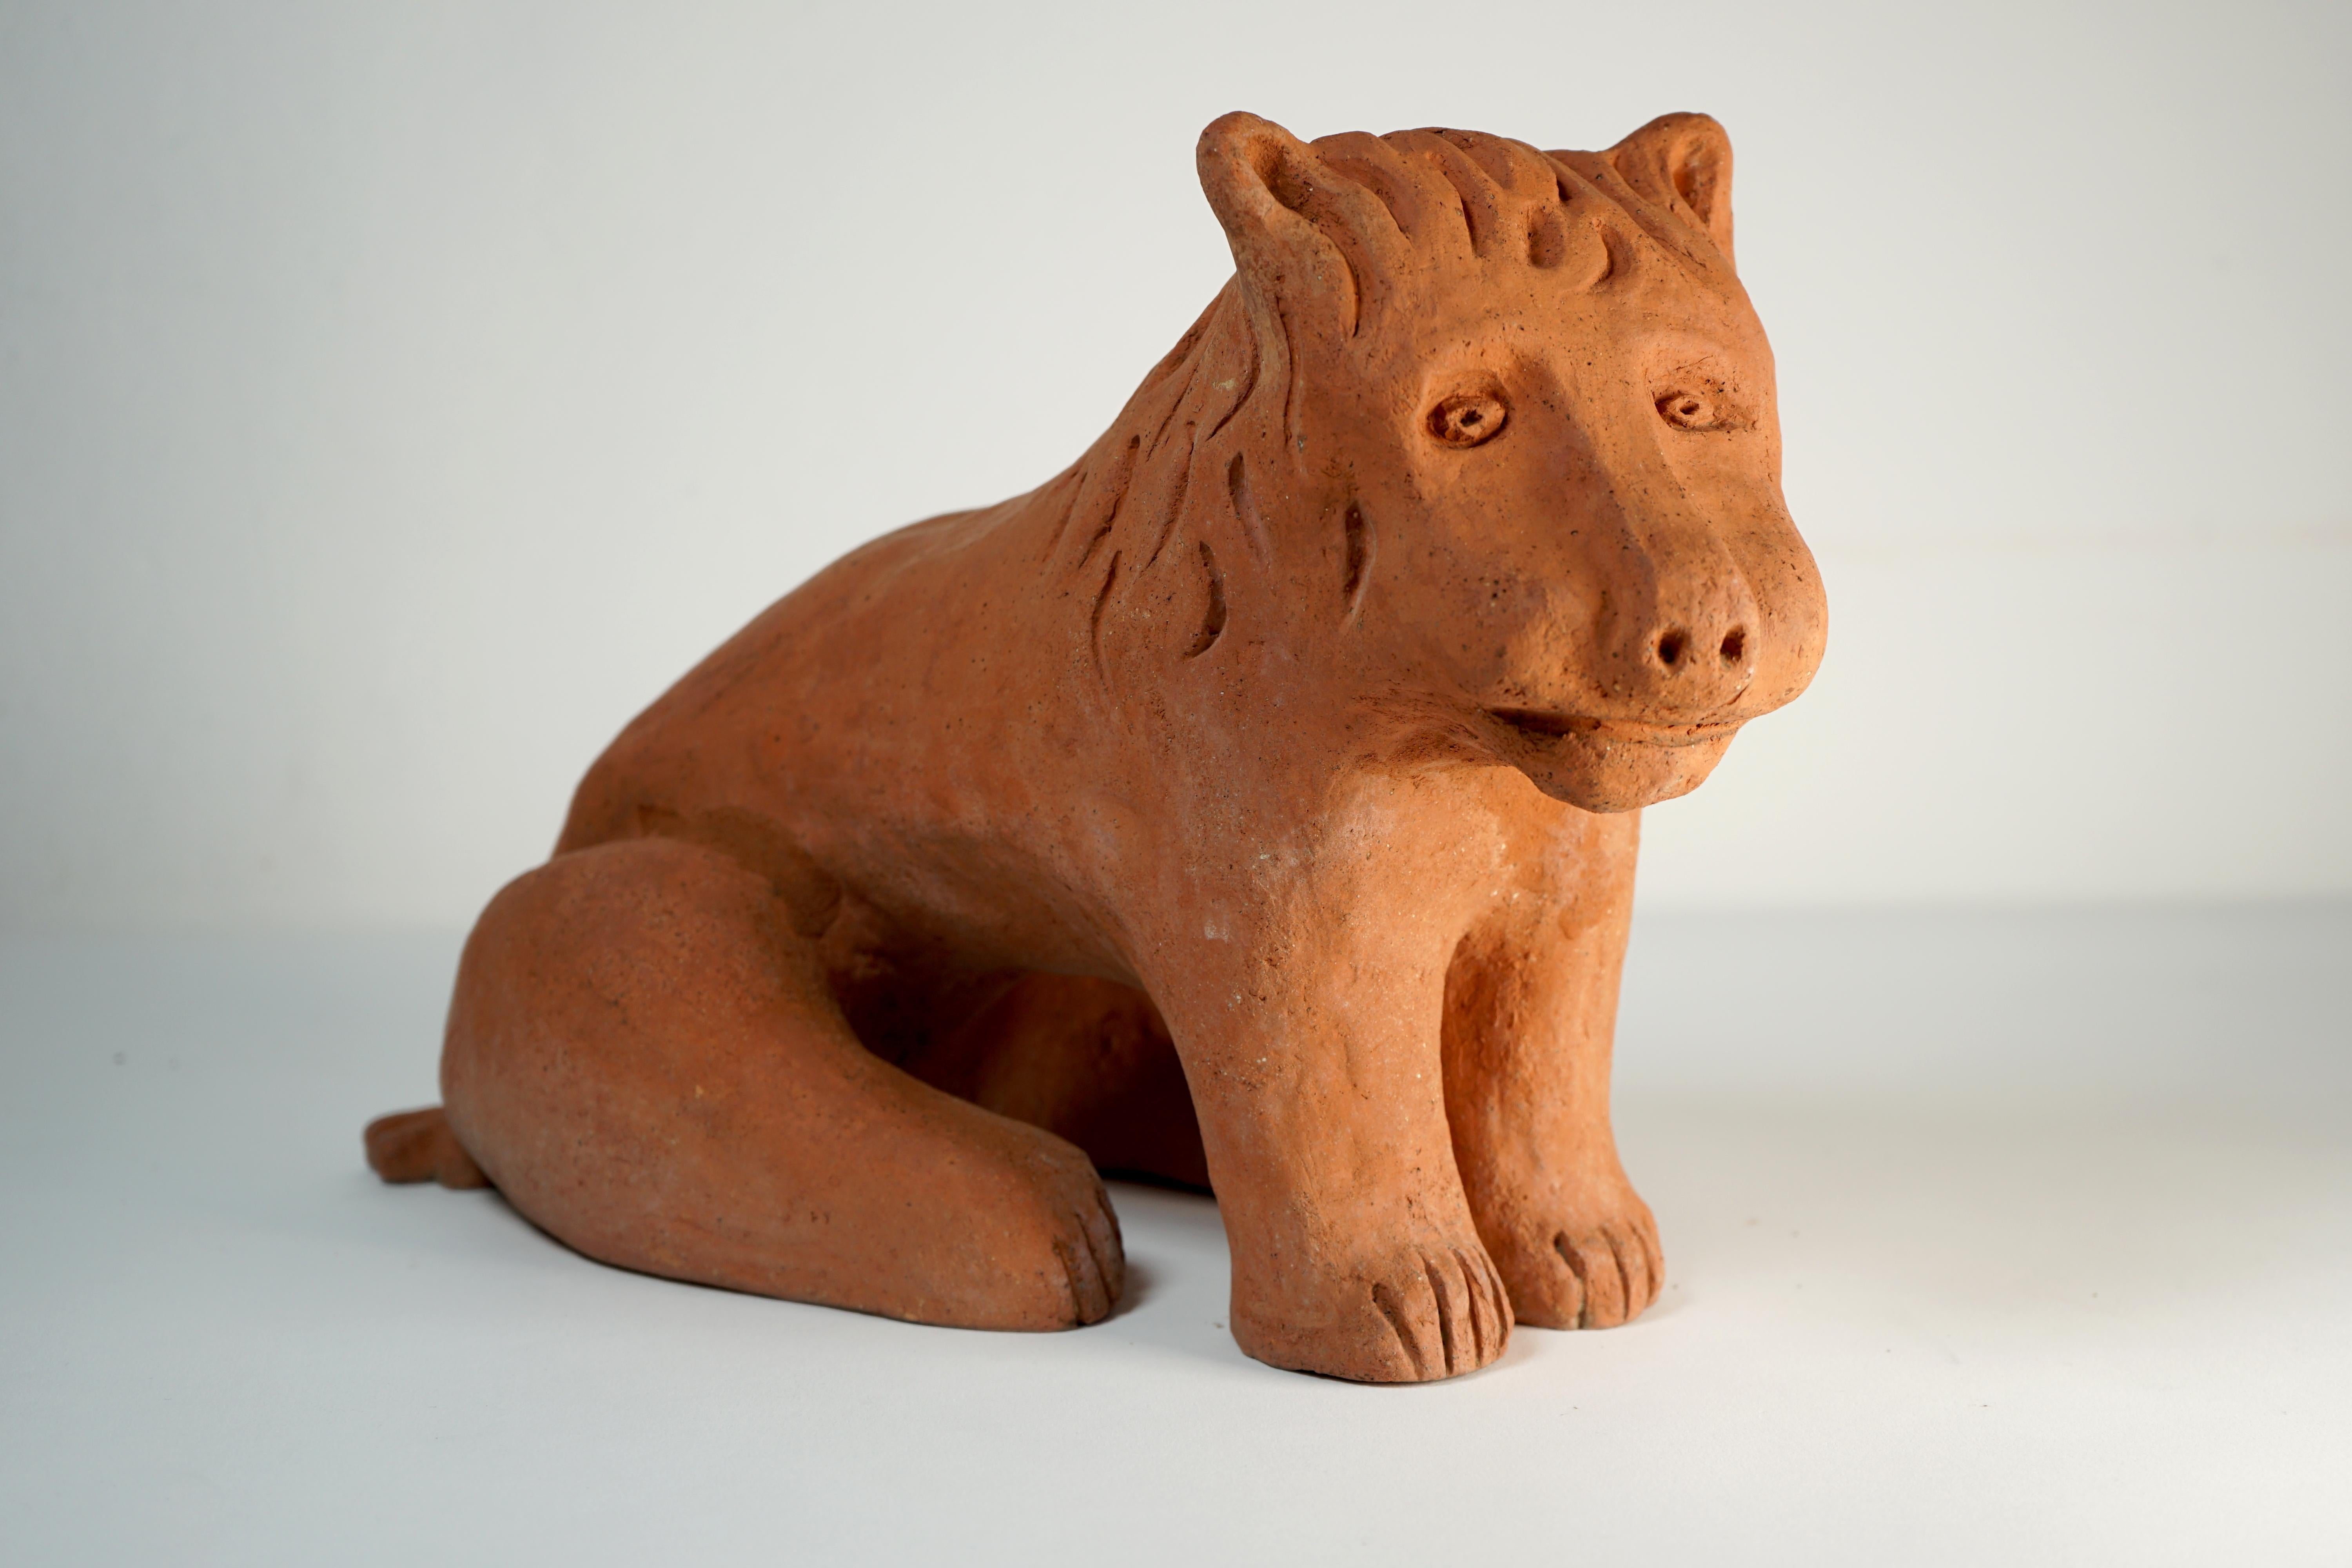 Ceramic Sculpture Lion Model by Nathalie Du Pasquier for Alessio Sarri Editions In Excellent Condition For Sale In Milan, Italy